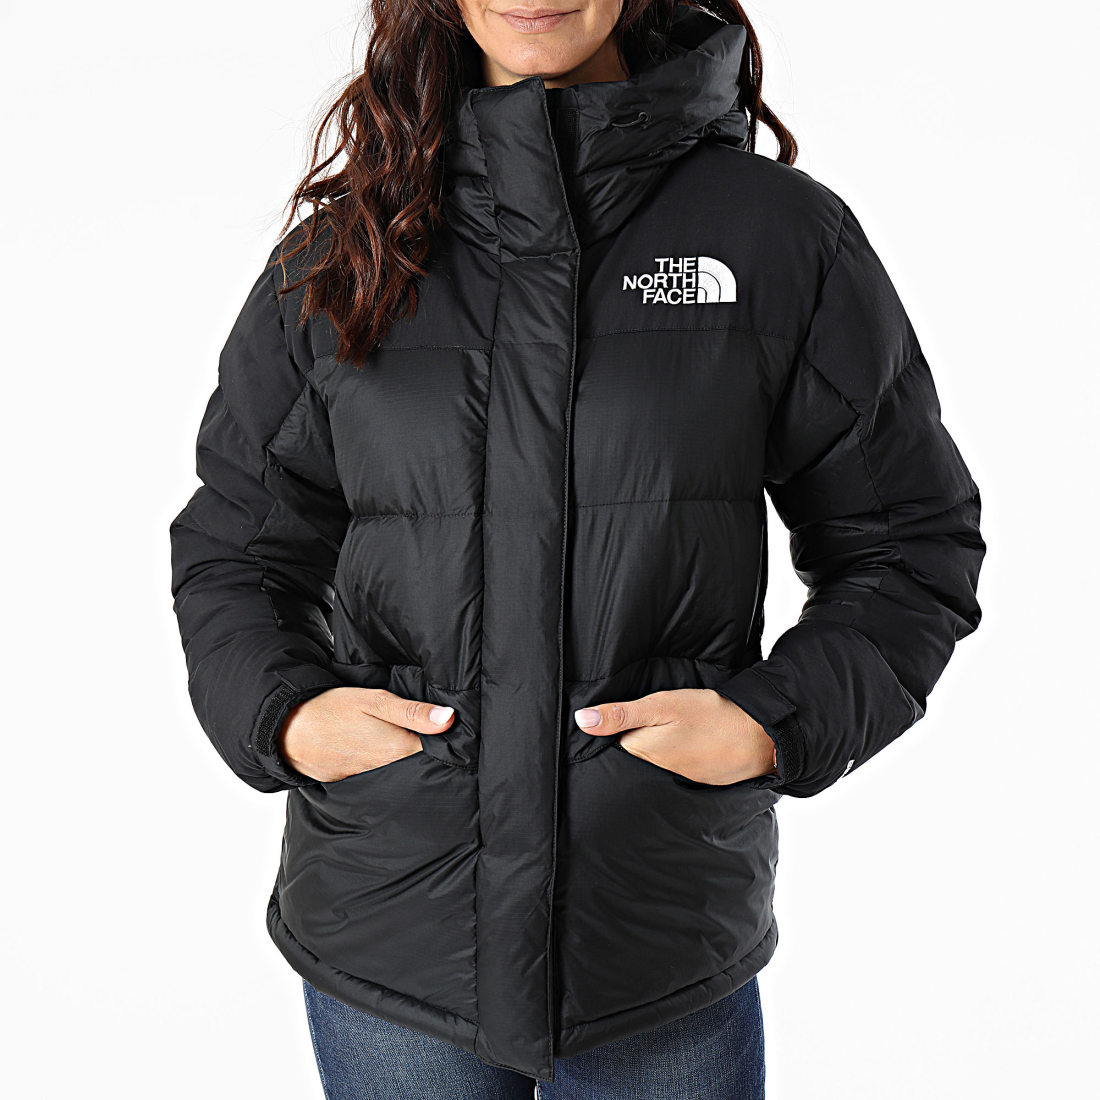 The North Face Himalayan Down Parka Jacket In Black | sites.unimi.it